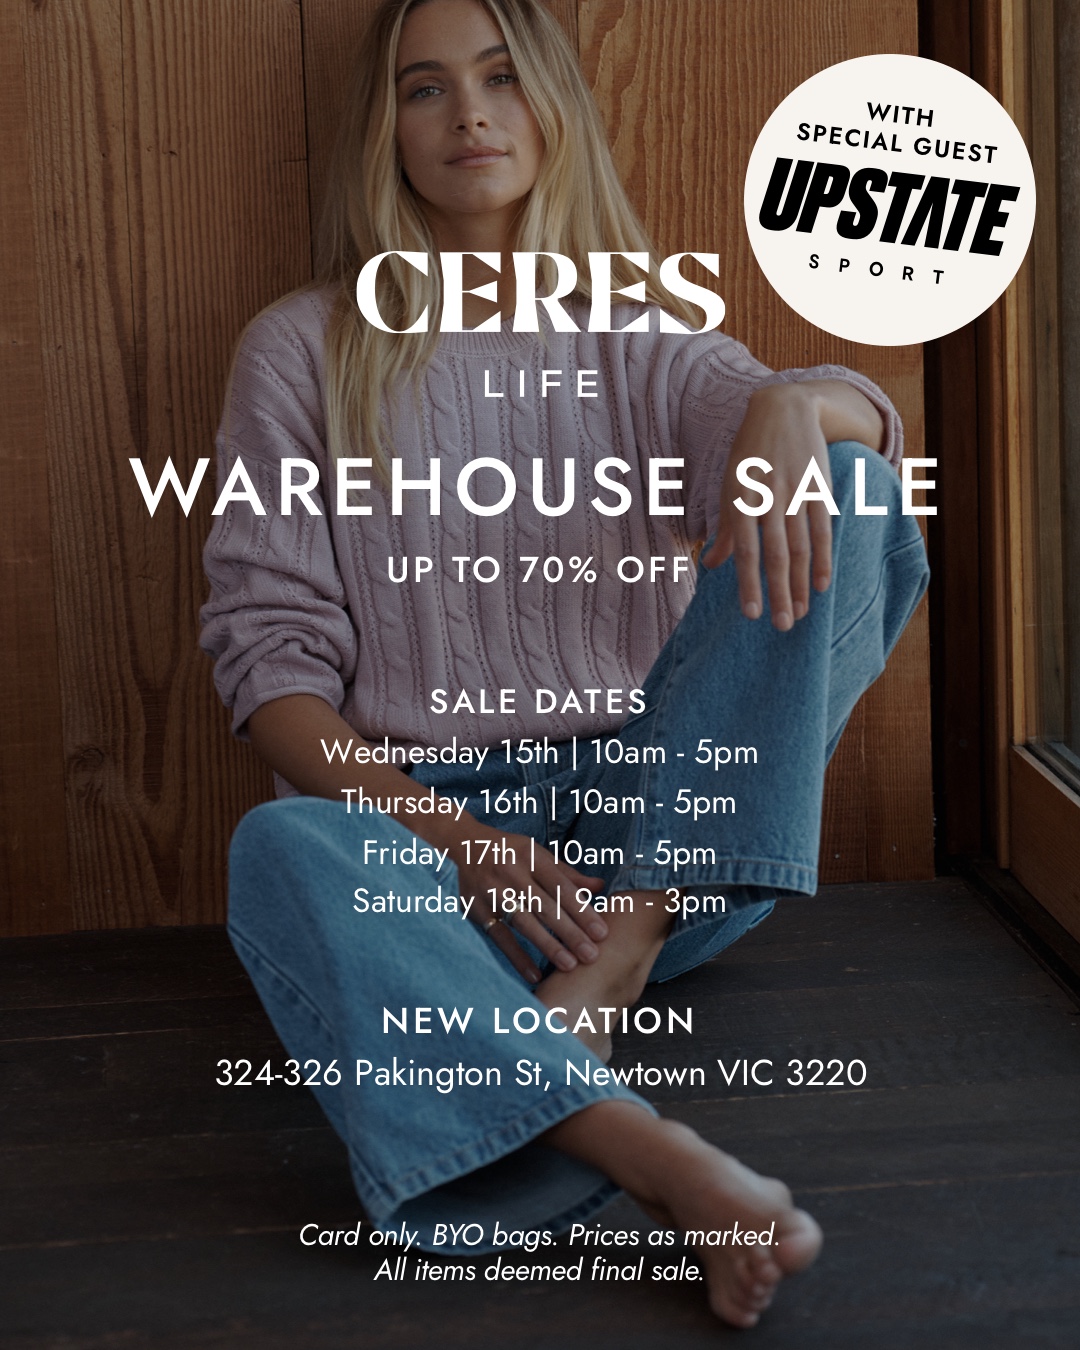 Warehouse Sale Wednesday 15th - Saturday 18th. 10am - 5pm 324-326 Pakington St, Newtown, Geelong.